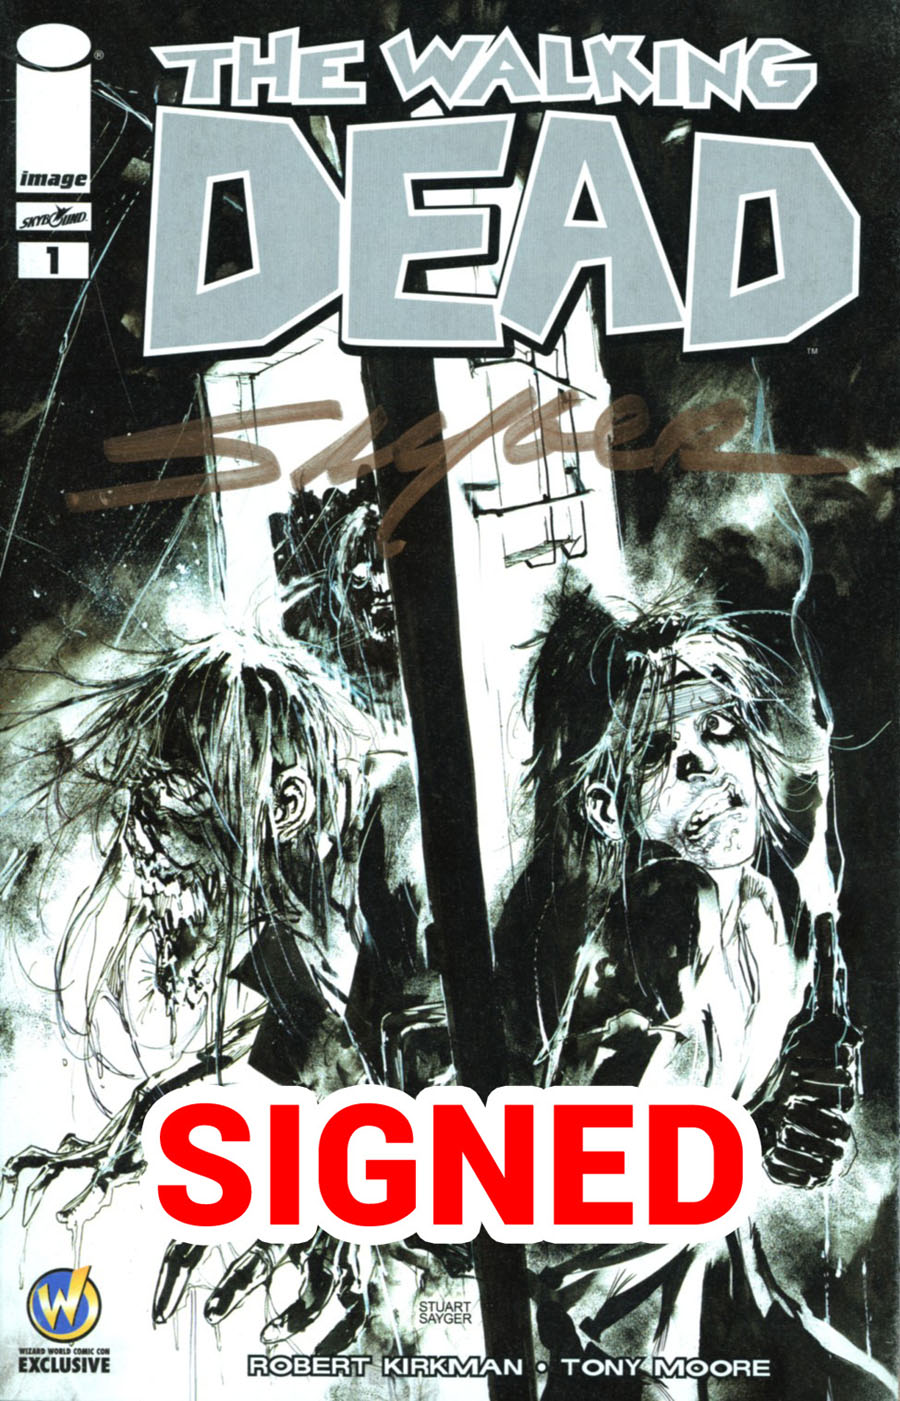 Walking Dead #1 Cover Z-C Wizard World Comic Con Columbus VIP Exclusive Stuart Sayger Sketch Variant Cover Signed By Stuart Sayger